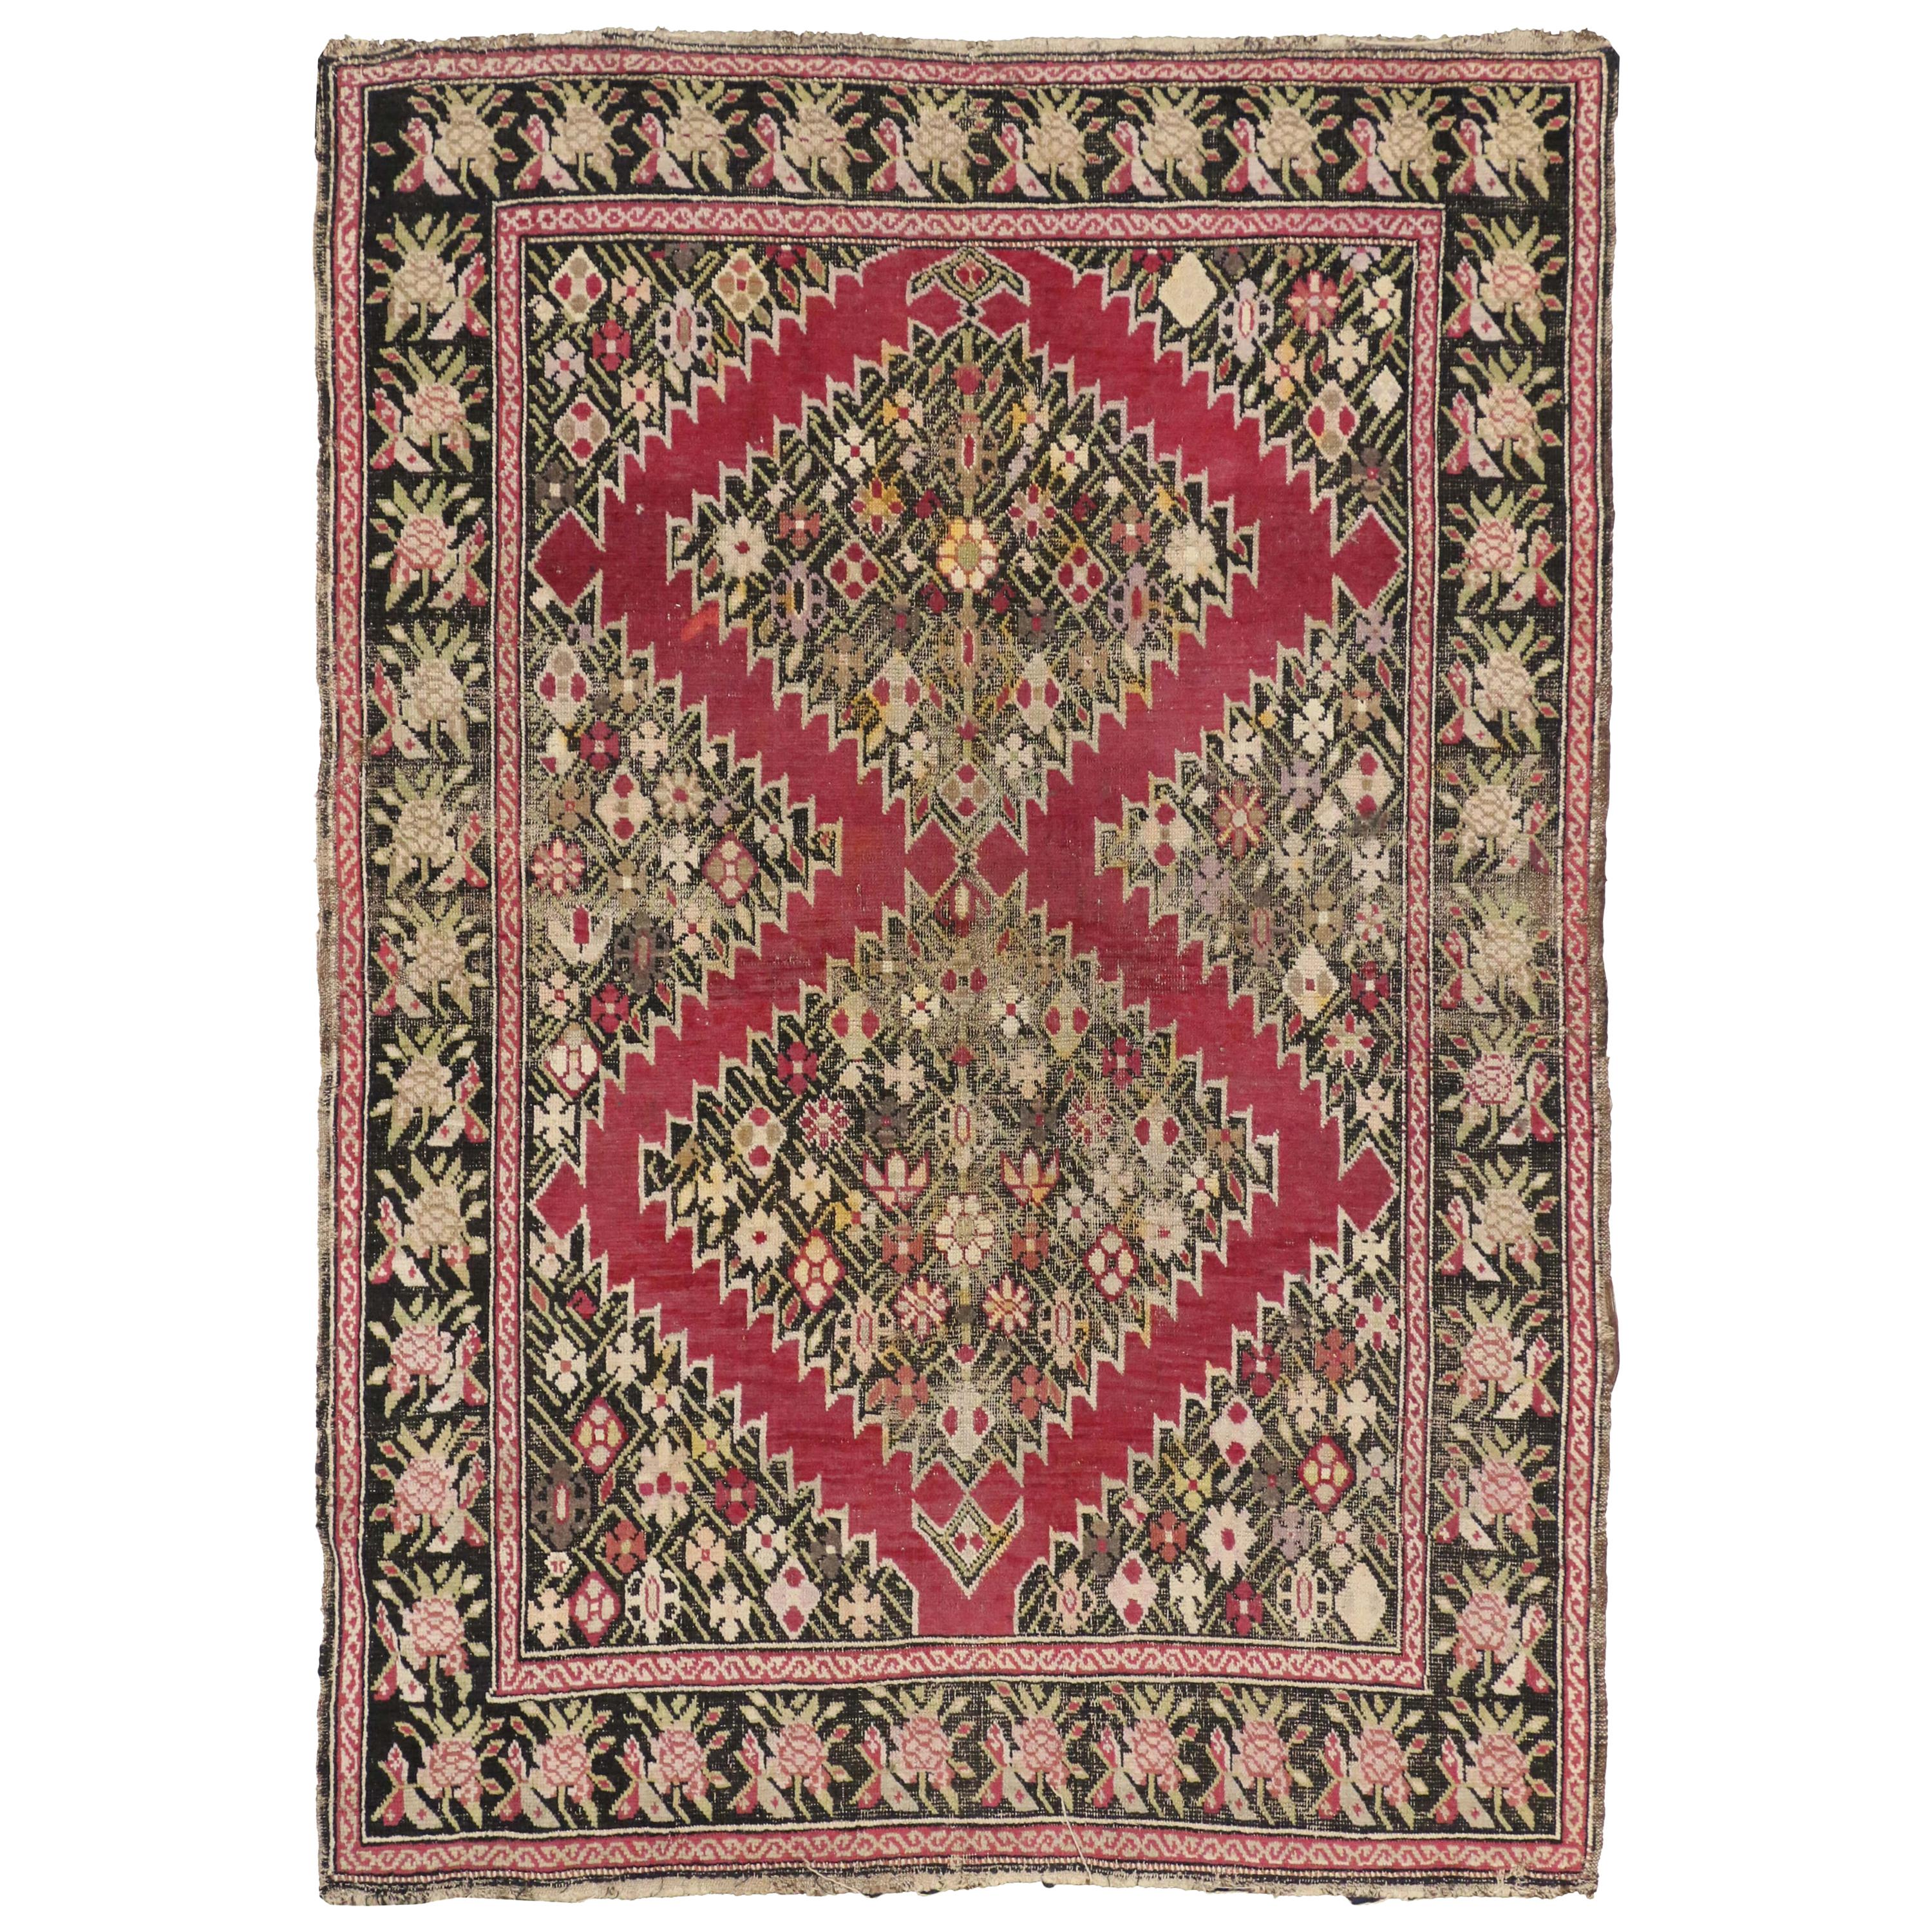 Antique Persian Karabakh Rug, Persian Gharabagh Accent Rug with Old World Style